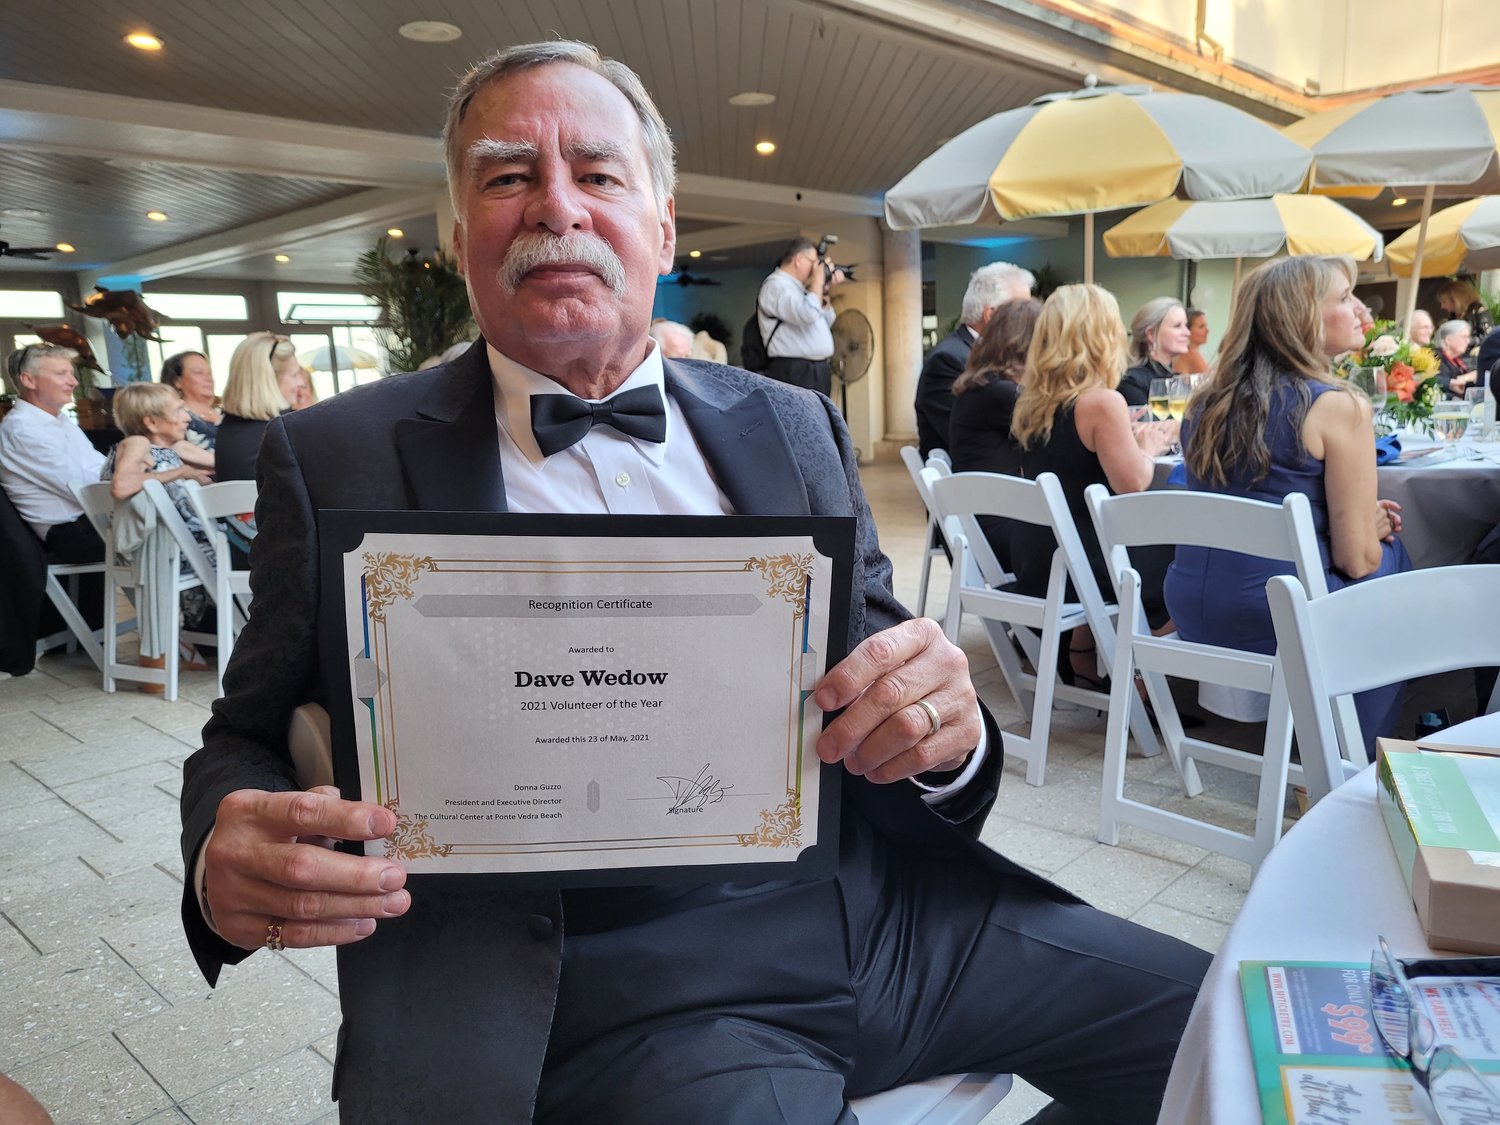 David Wedow was named volunteer of the year at the second annual Beaches, A Celebration of the Arts.